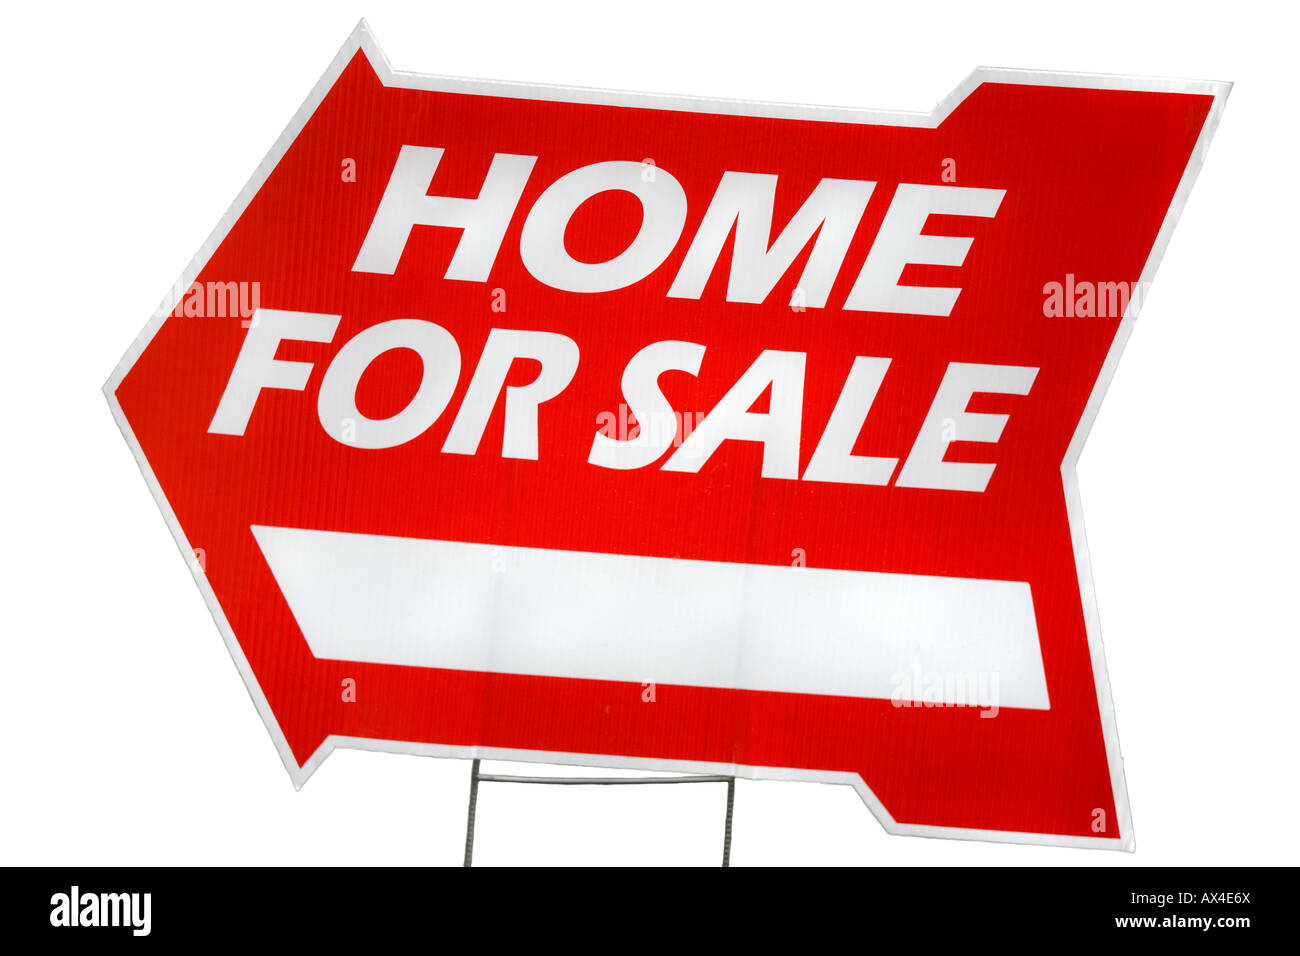 Home for sale sign. Red signboard with arrow on white background cut out cutout Stock Photo